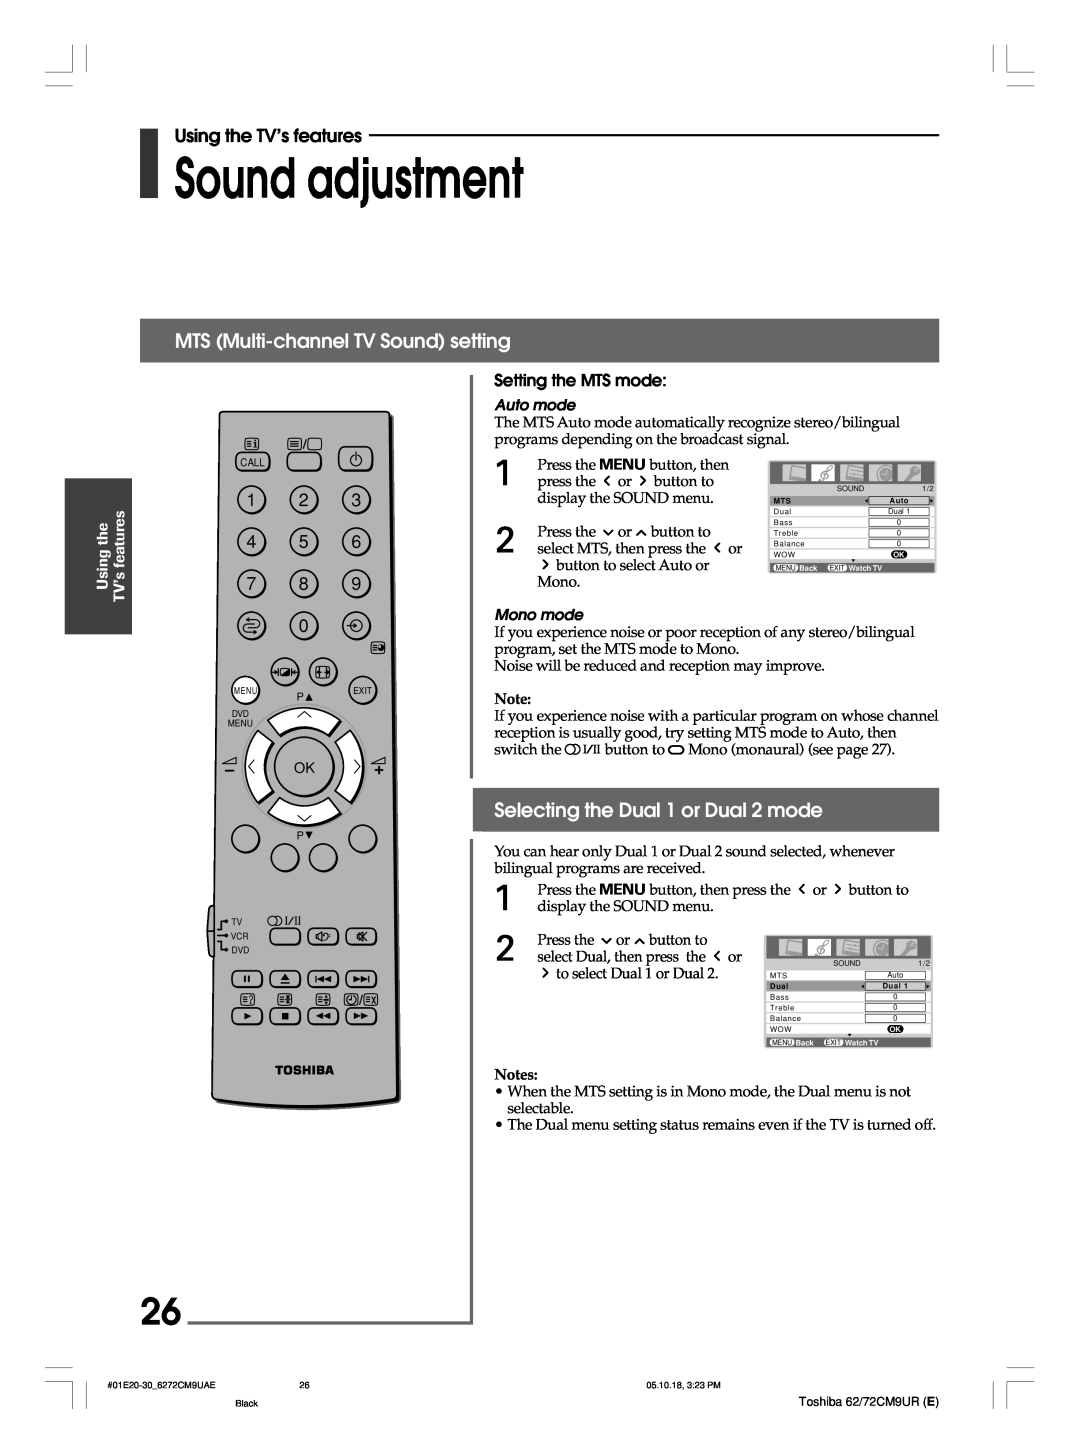 Toshiba 62CM9UE Sound adjustment, MTS Multi-channel TV Sound setting, Selecting the Dual 1 or Dual 2 mode, Auto mode 